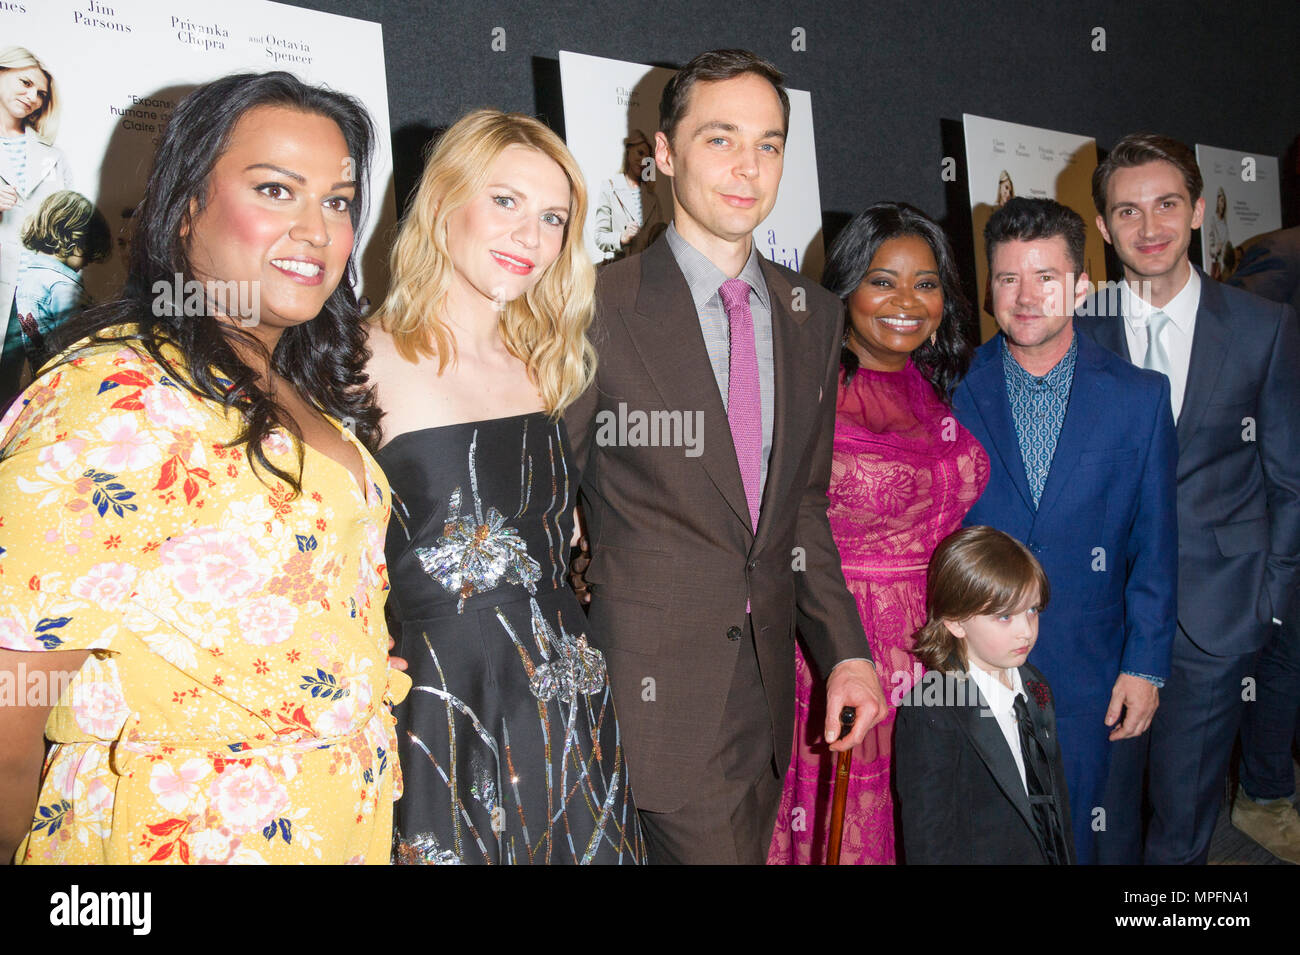 New York, NY - May 21, 2018: Aneesh Sheth, Claire Danes, Jim Parsons, Leo James Davis, Octavia Spencer, Silas Howard, Daniel Pearle attend A Kid Like Jake premiere at The Landmark at 57 West Stock Photo